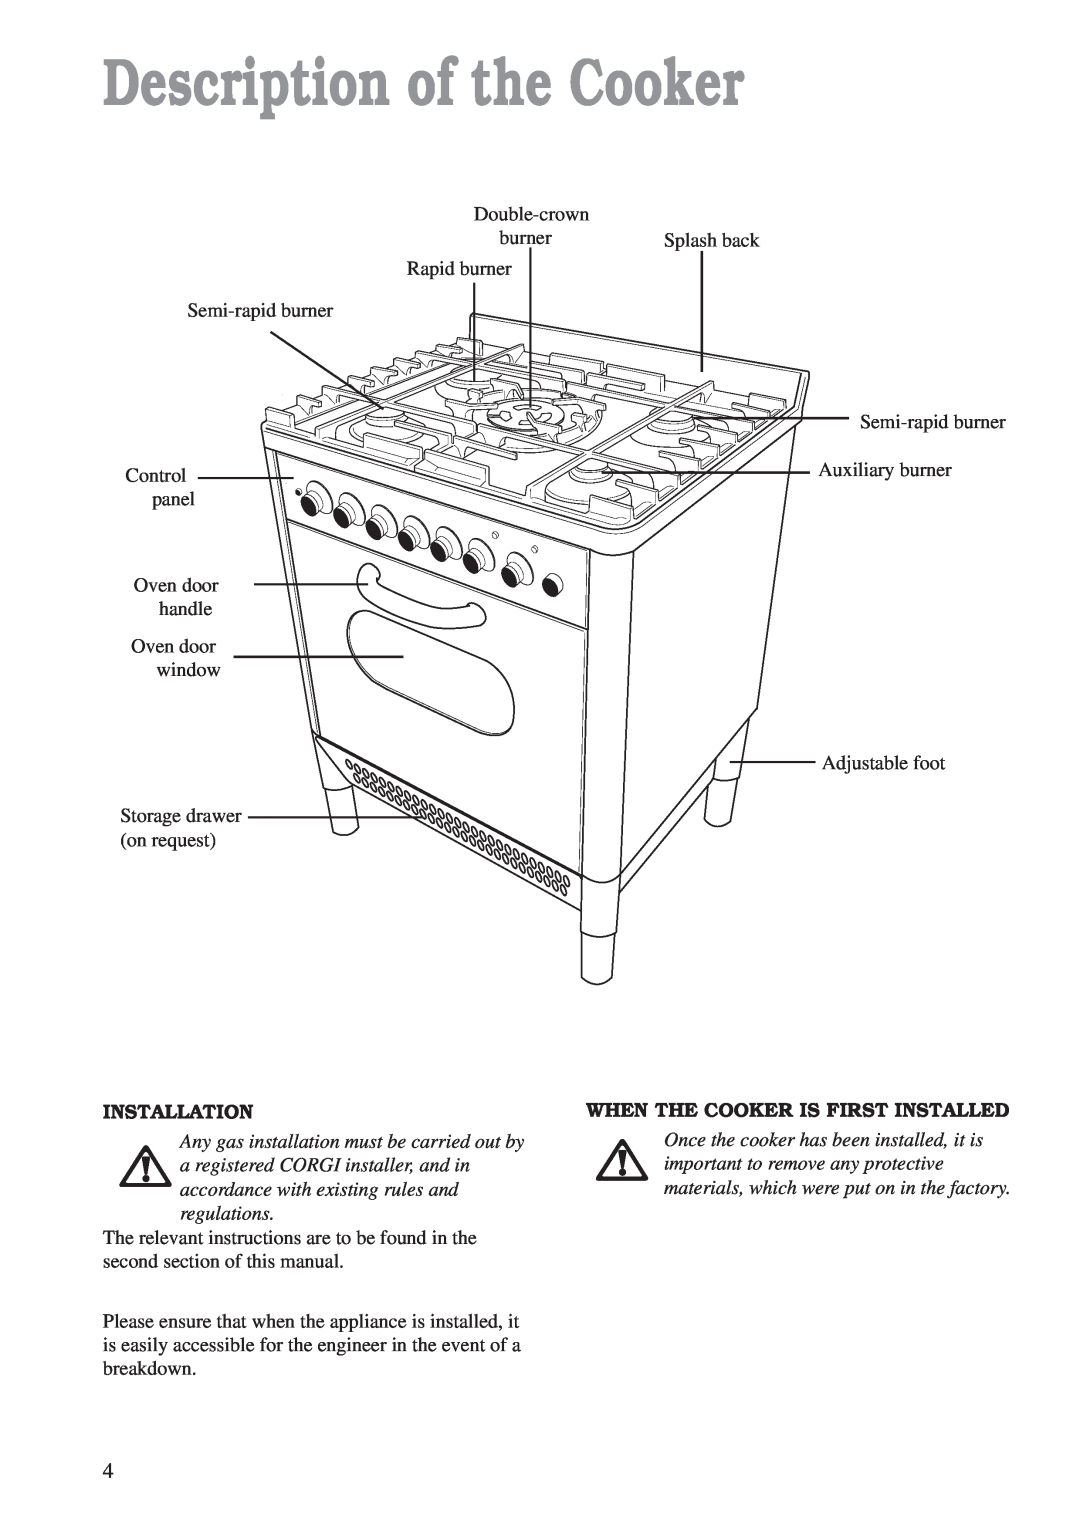 Zanussi ZCM 700 X manual Description of the Cooker, Installation, When The Cooker Is First Installed 